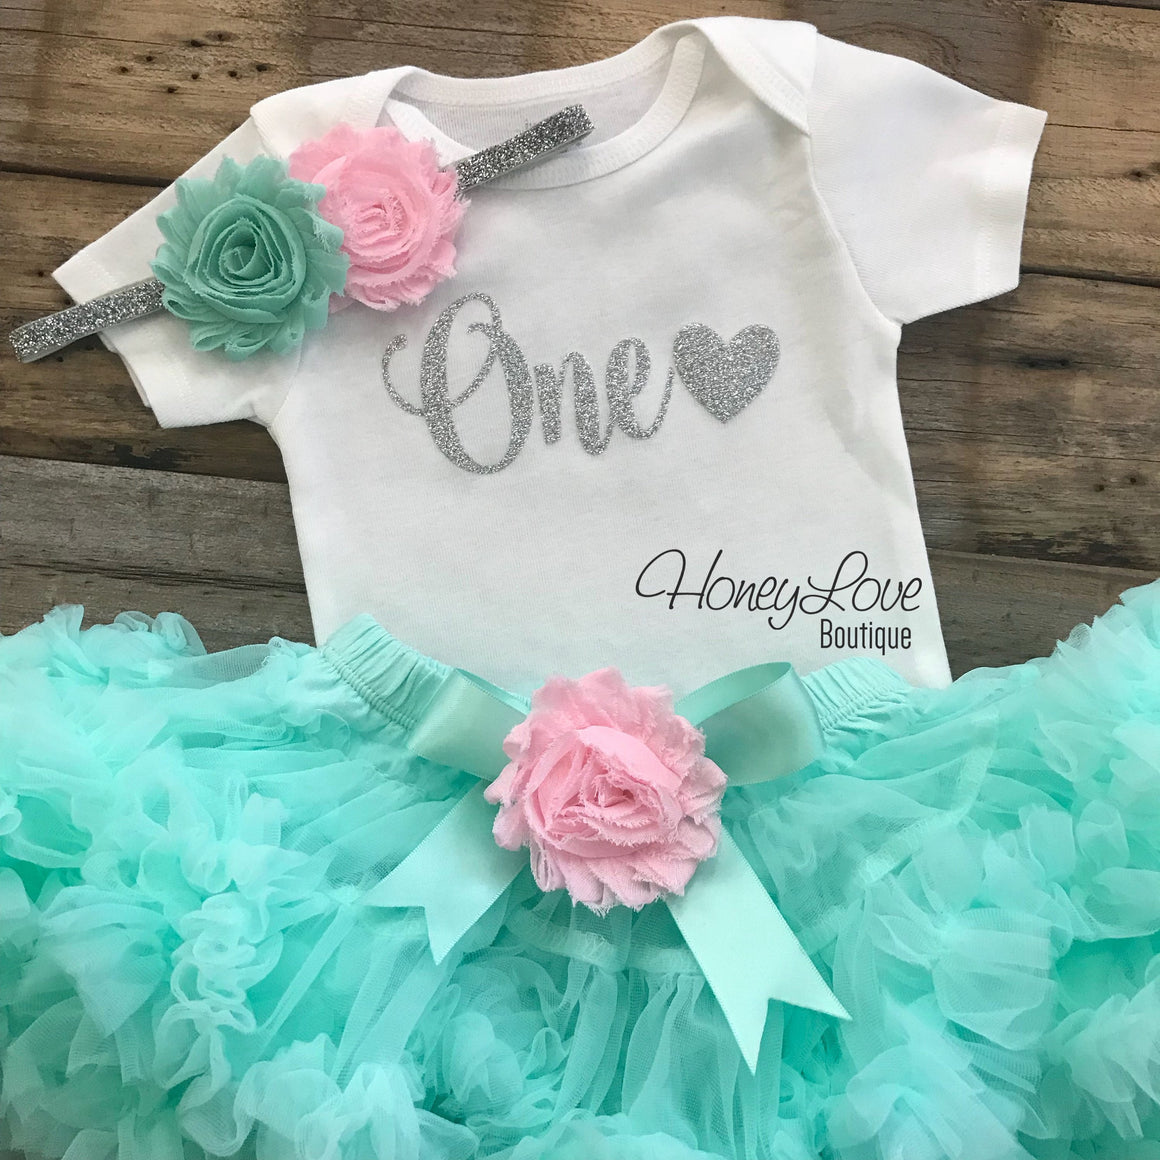 One with heart - Birthday Outfit - Mint/Aqua, Light Pink and Gold/Silver glitter - HoneyLoveBoutique